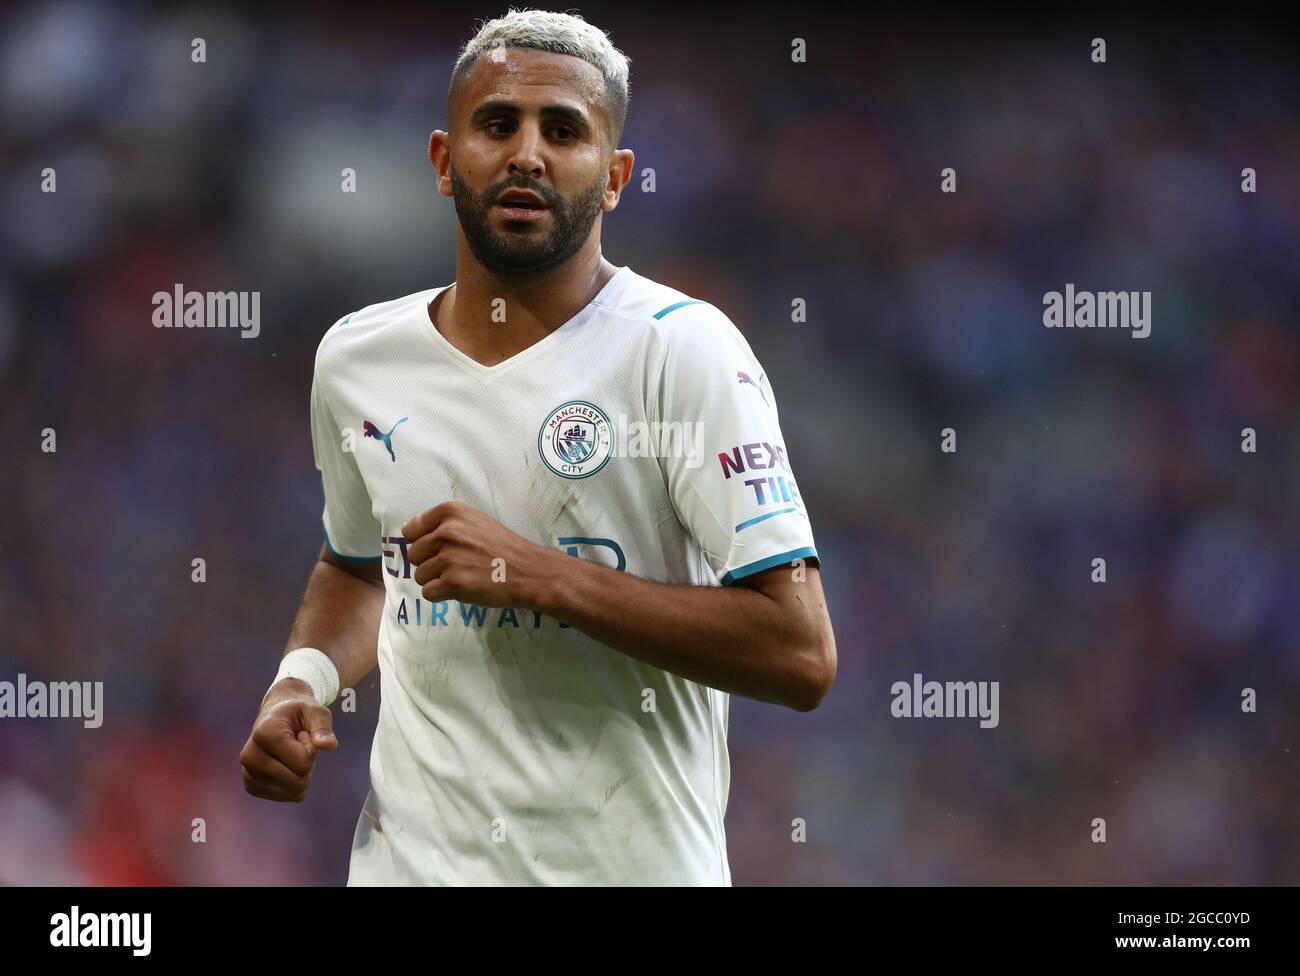 London, England, 7th August 2021. Riyad Mahrez of Manchester City during The FA Community Shield match at Wembley Stadium, London. Picture credit should read: Paul Terry / Sportimage Stock Photo